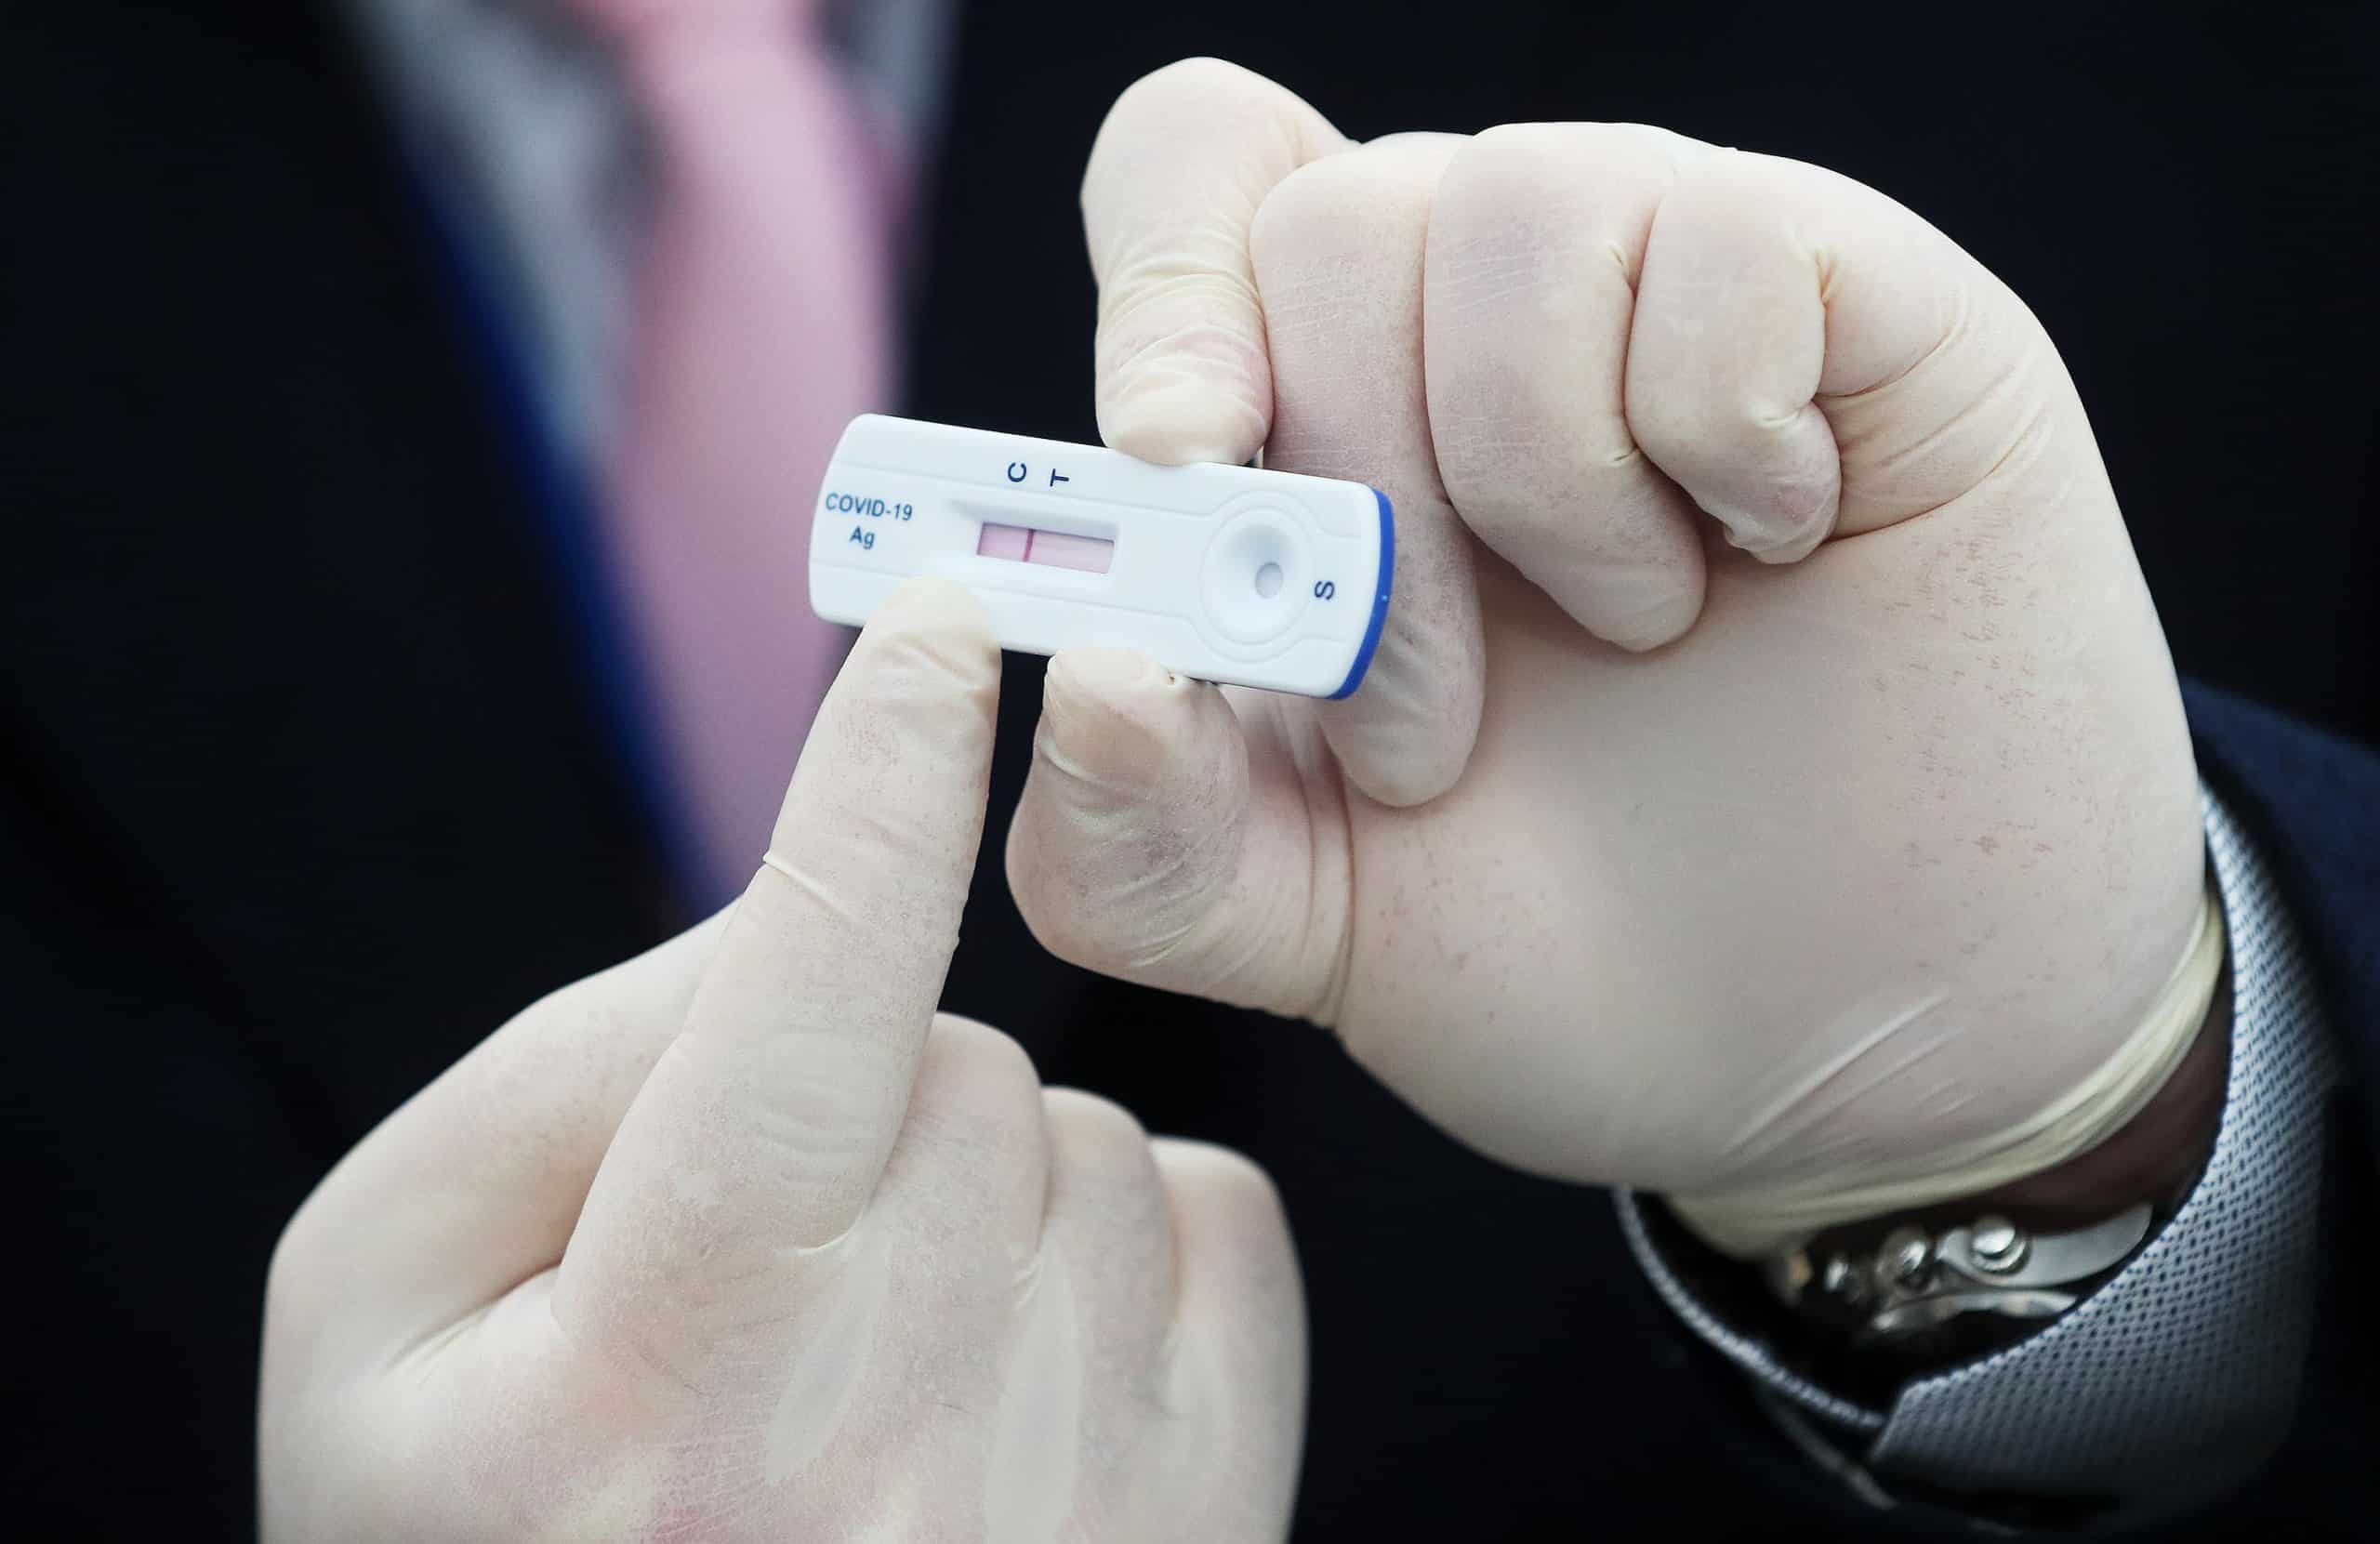 Covid testing firm ‘selling swabs carrying customers’ DNA’ to third parties